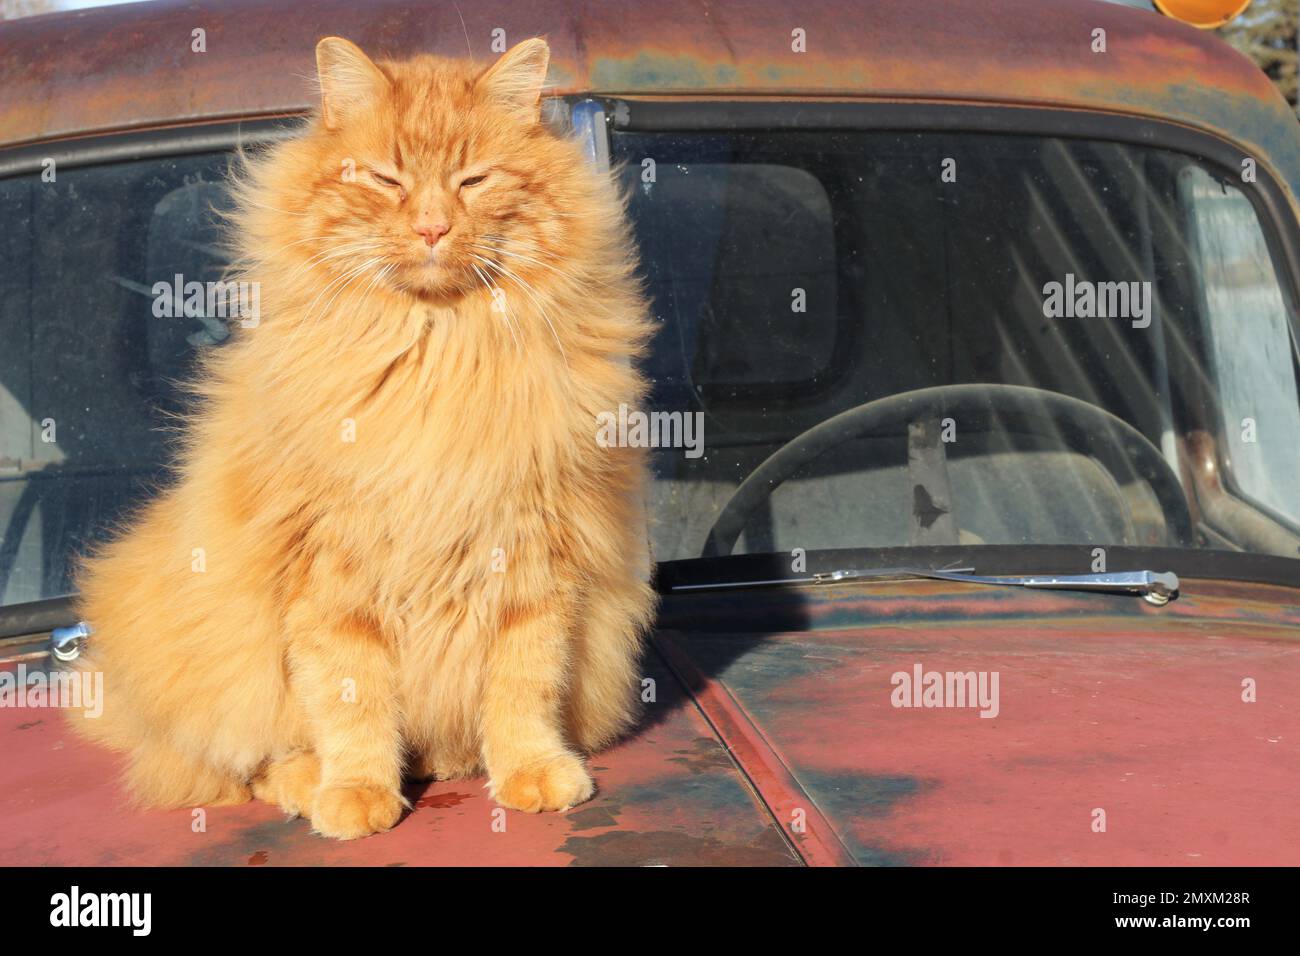 A long-haired lion like orange cat sitting on the hood of an old truck. Stock Photo